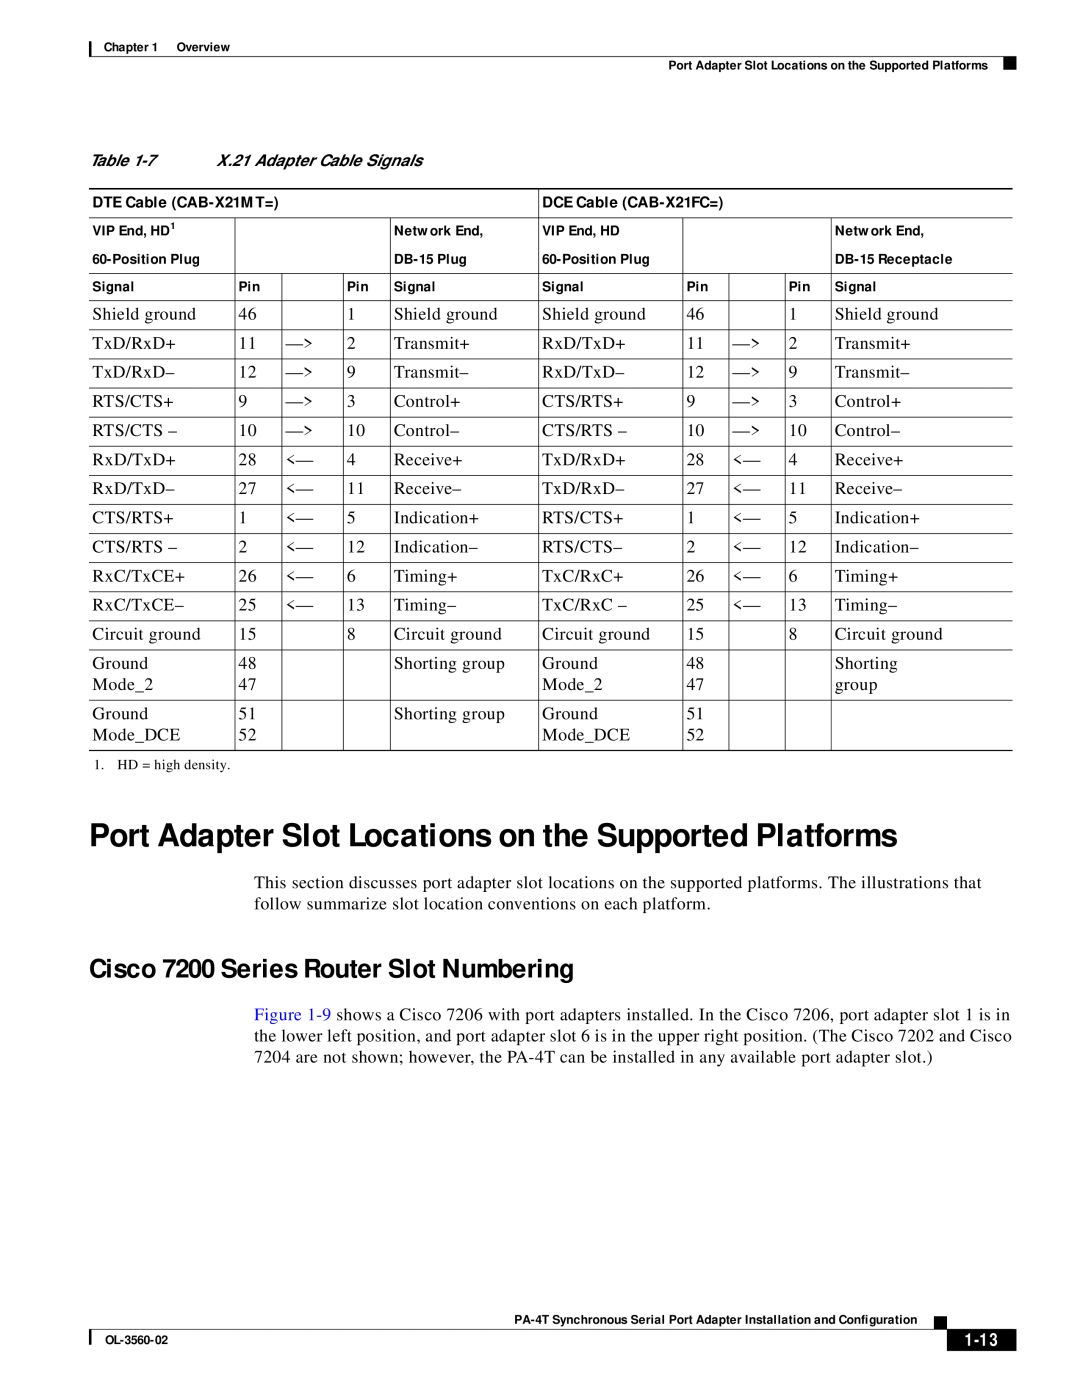 Cisco Systems OL-3560-02 Port Adapter Slot Locations on the Supported Platforms, Cisco 7200 Series Router Slot Numbering 